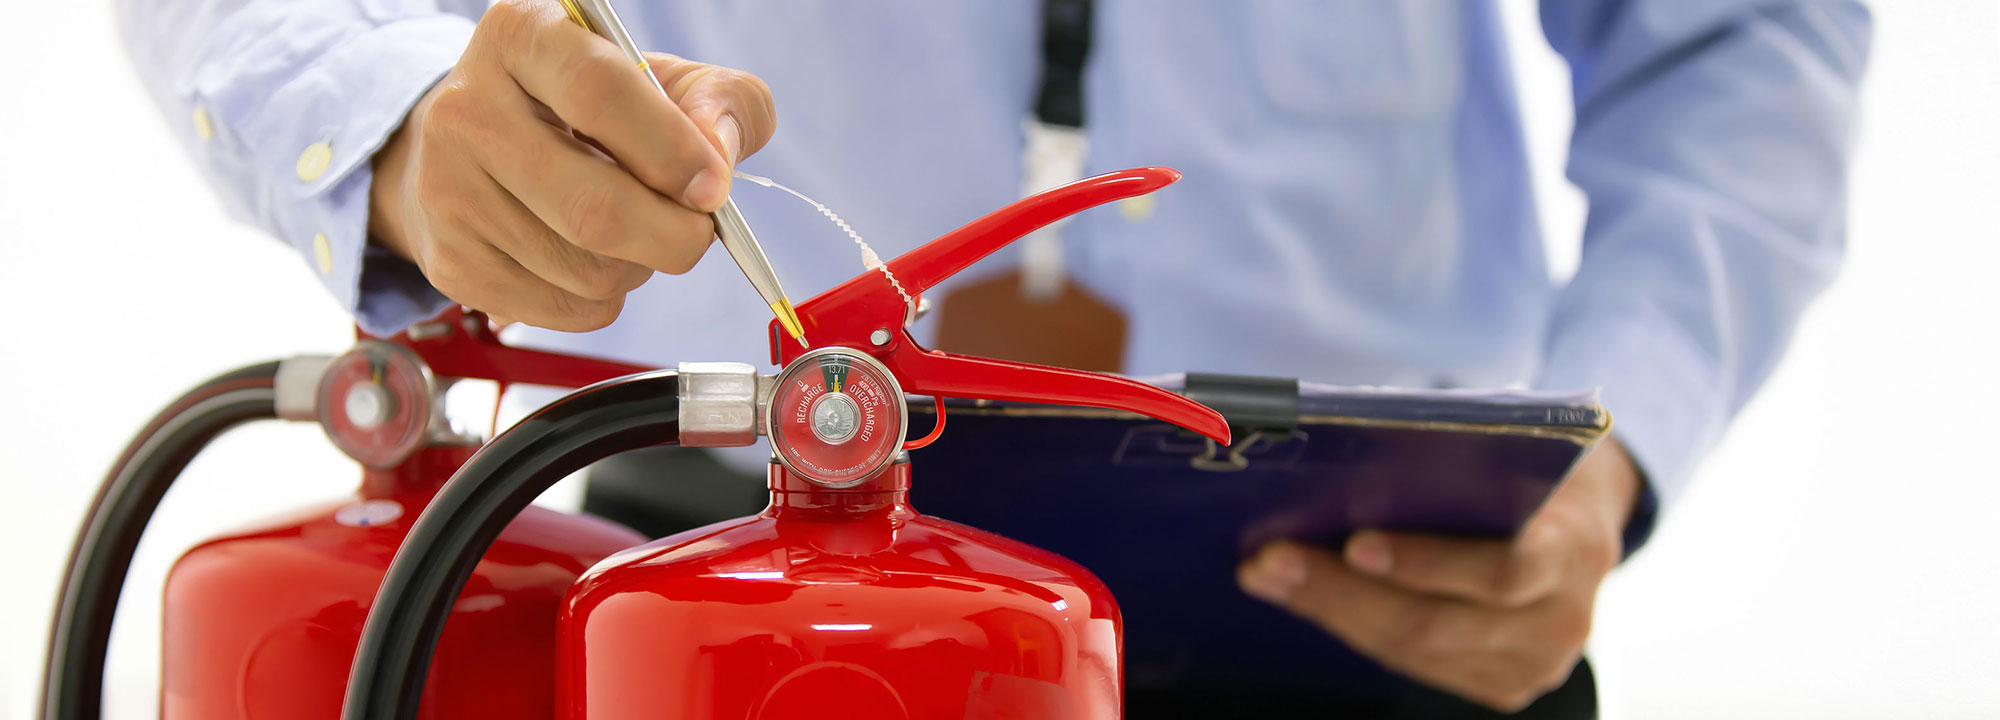 Fire Extinguisher installation, maintenance and inspection by qualified professionals from Optimum Fire and Security